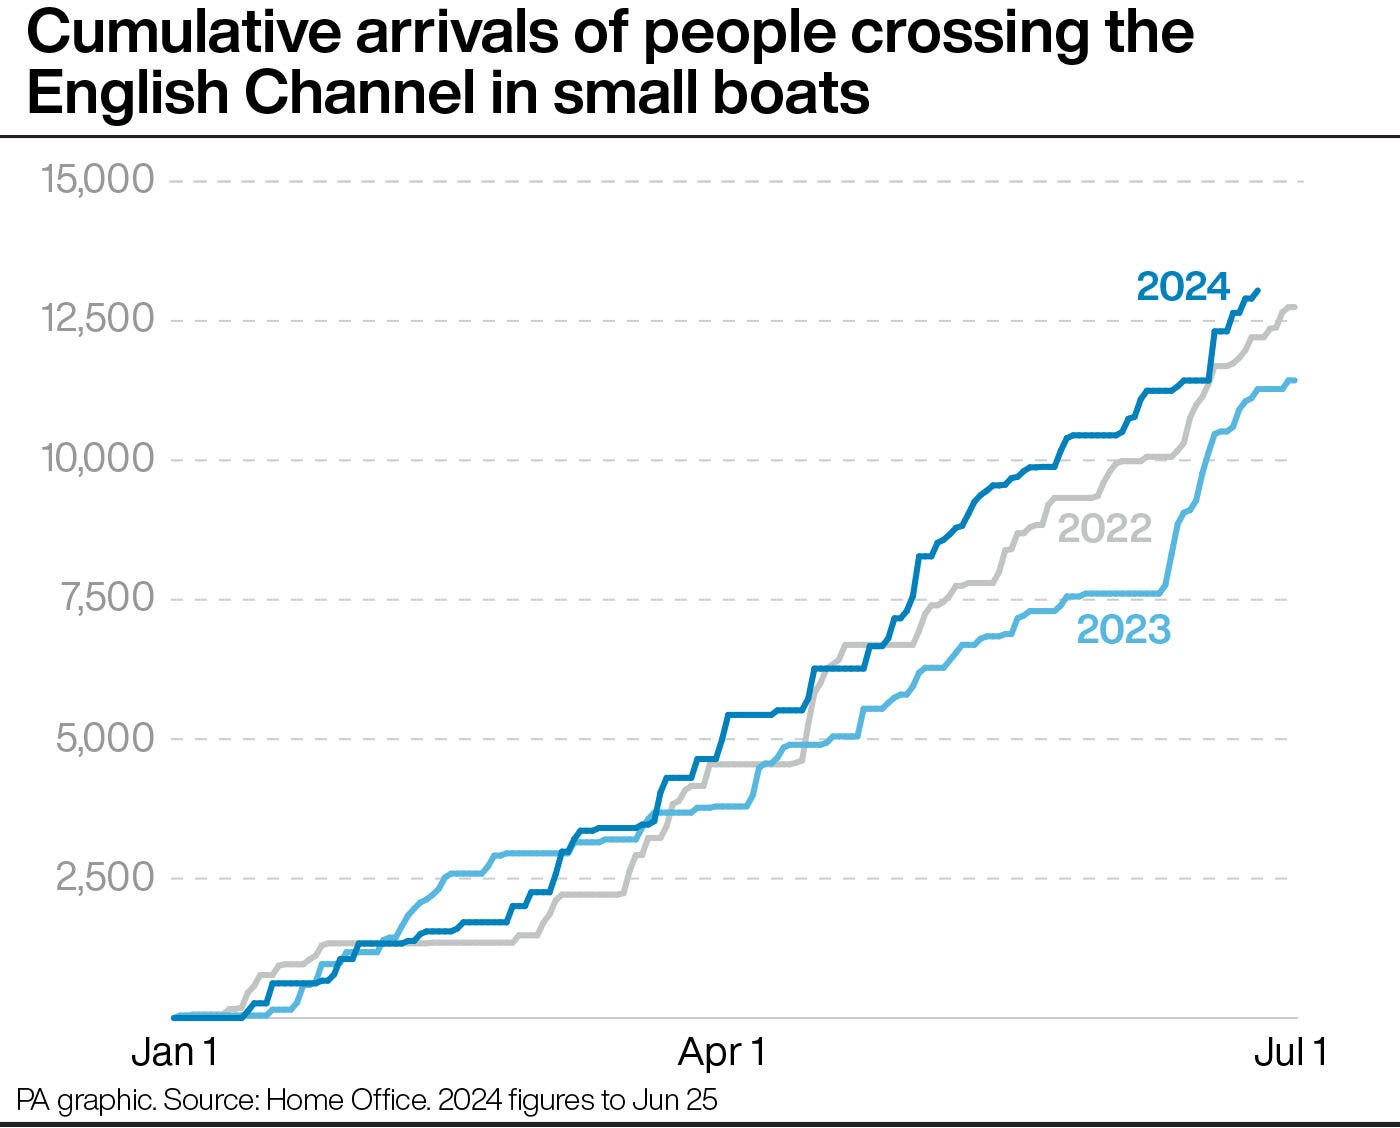 Small boat crossings are at a record high